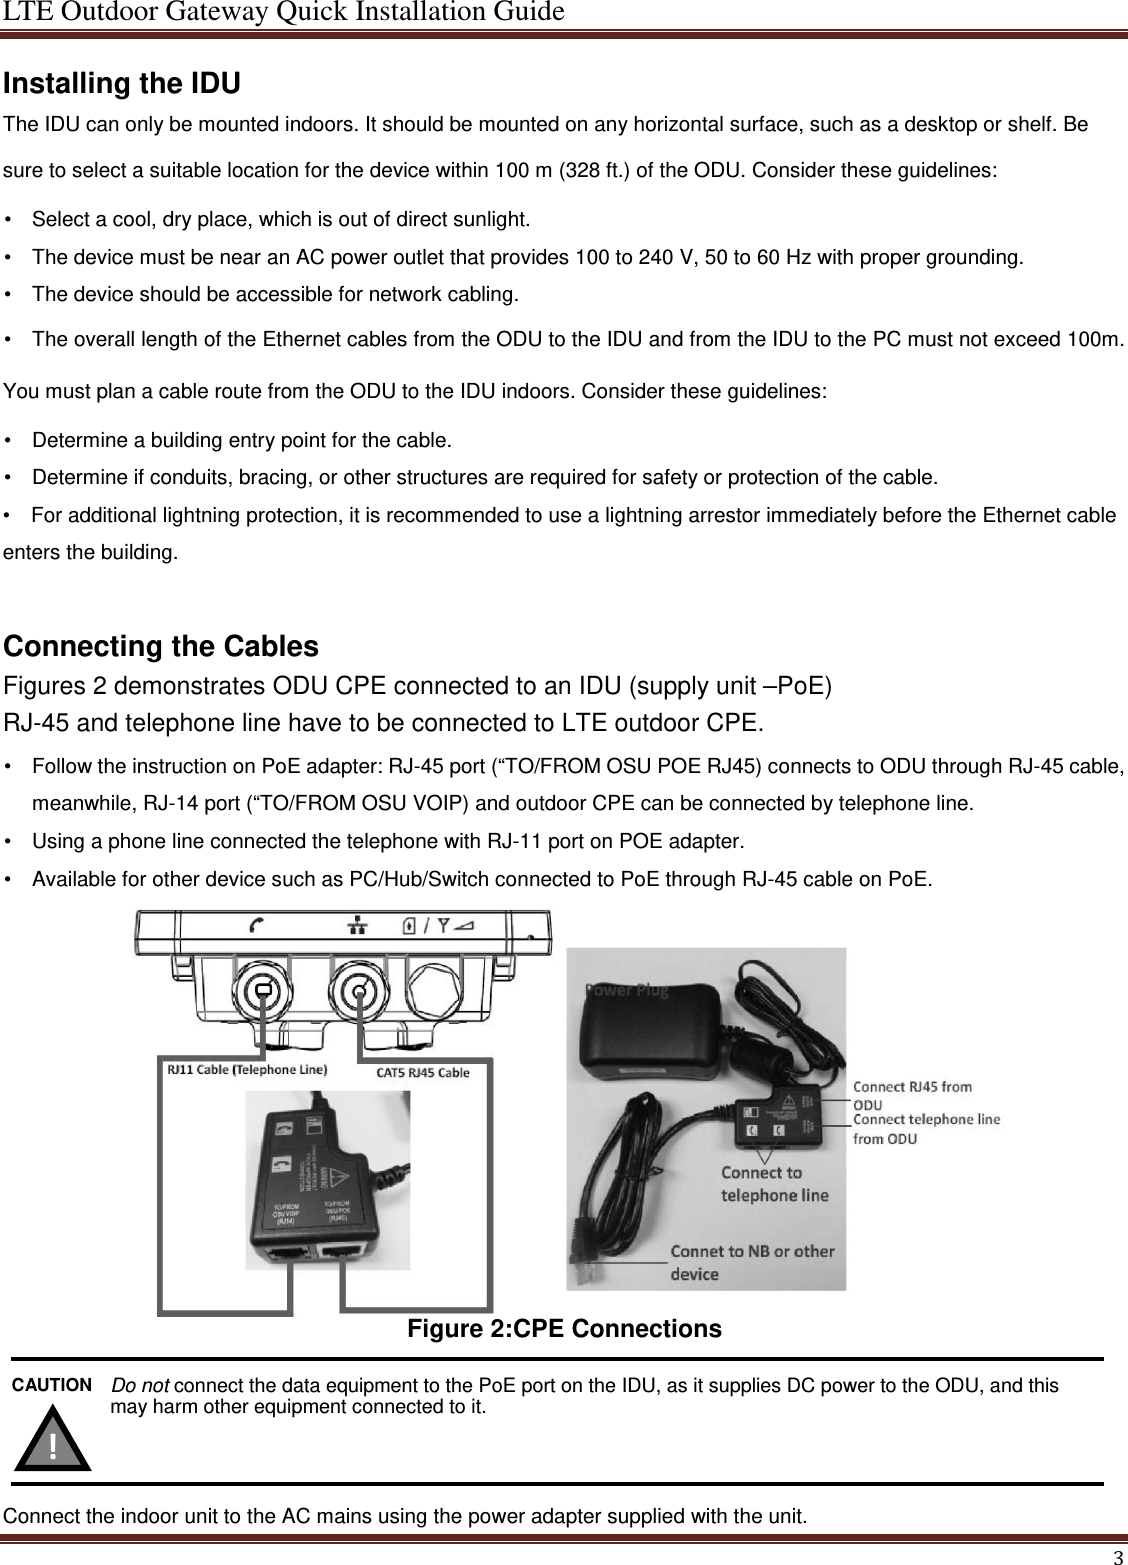 LTE Outdoor Gateway Quick Installation Guide  Installing the IDU The IDU can only be mounted indoors. It should be mounted on any horizontal surface, such as a desktop or shelf. Be sure to select a suitable location for the device within 100 m (328 ft.) of the ODU. Consider these guidelines:  •  Select a cool, dry place, which is out of direct sunlight.   •  The device must be near an AC power outlet that provides 100 to 240 V, 50 to 60 Hz with proper grounding.   •  The device should be accessible for network cabling.   •  The overall length of the Ethernet cables from the ODU to the IDU and from the IDU to the PC must not exceed 100m. You must plan a cable route from the ODU to the IDU indoors. Consider these guidelines:    •  Determine a building entry point for the cable.   •  Determine if conduits, bracing, or other structures are required for safety or protection of the cable.   •   For additional lightning protection, it is recommended to use a lightning arrestor immediately before the Ethernet cable enters the building.  Connecting the Cables  Figures 2 demonstrates ODU CPE connected to an IDU (supply unit –PoE) RJ-45 and telephone line have to be connected to LTE outdoor CPE.  •  Follow the instruction on PoE adapter: RJ-45 port (“TO/FROM OSU POE RJ45) connects to ODU through RJ-45 cable, meanwhile, RJ-14 port (“TO/FROM OSU VOIP) and outdoor CPE can be connected by telephone line.   •  Using a phone line connected the telephone with RJ-11 port on POE adapter. •  Available for other device such as PC/Hub/Switch connected to PoE through RJ-45 cable on PoE.              Figure 2:CPE Connections     Connect the indoor unit to the AC mains using the power adapter supplied with the unit. Do not connect the data equipment to the PoE port on the IDU, as it supplies DC power to the ODU, and this may harm other equipment connected to it.  CAUTION  !   3 